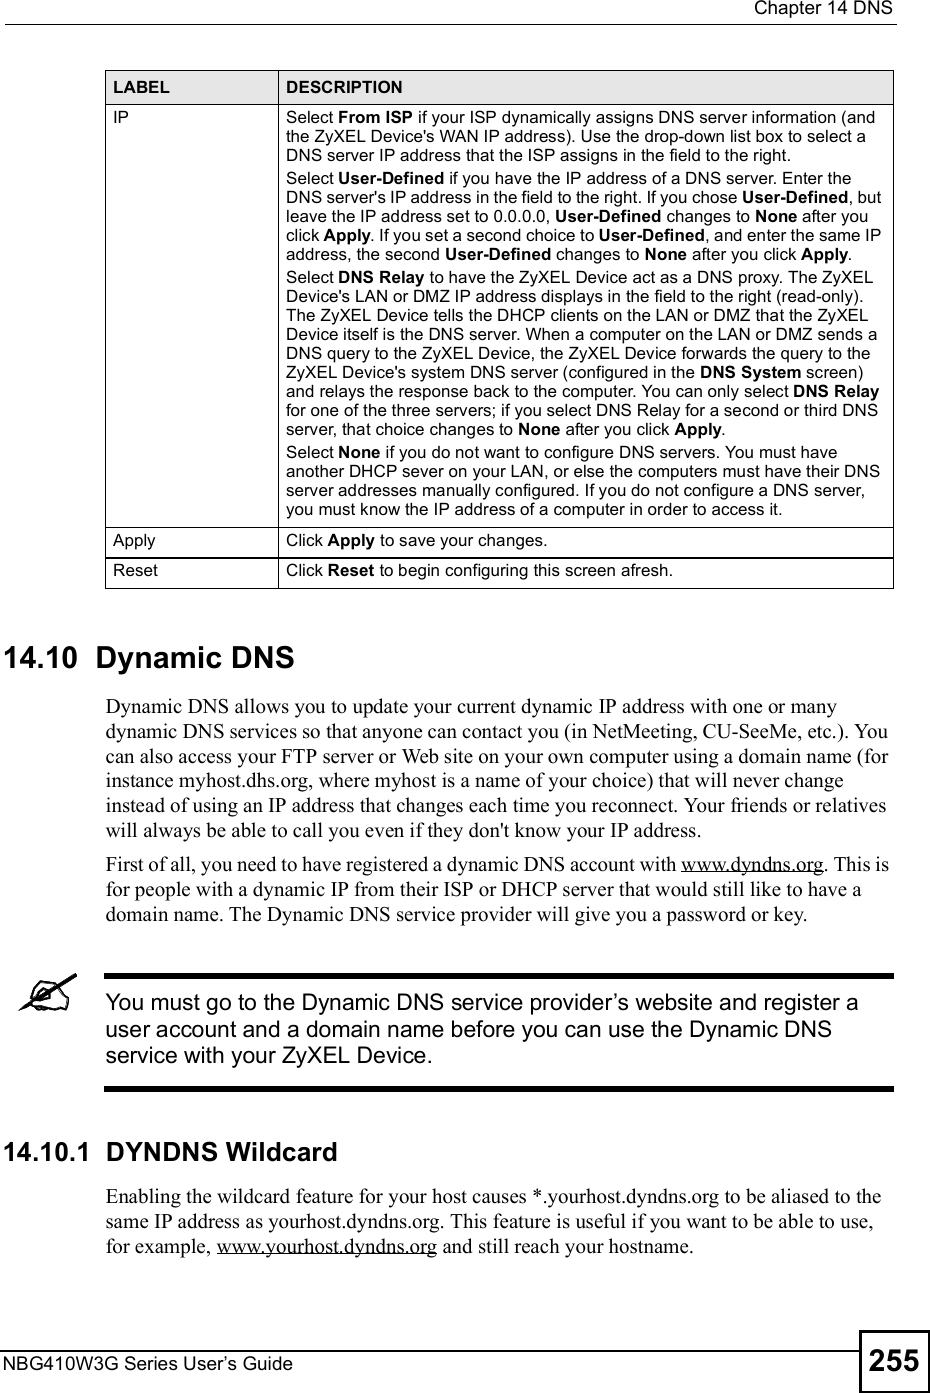  Chapter 14DNSNBG410W3G Series User s Guide 25514.10  Dynamic DNS  Dynamic DNS allows you to update your current dynamic IP address with one or many dynamic DNS services so that anyone can contact you (in NetMeeting, CU-SeeMe, etc.). You can also access your FTP server or Web site on your own computer using a domain name (for instance myhost.dhs.org, where myhost is a name of your choice) that will never change instead of using an IP address that changes each time you reconnect. Your friends or relatives will always be able to call you even if they don&apos;t know your IP address. First of all, you need to have registered a dynamic DNS account with www.dyndns.org. This is for people with a dynamic IP from their ISP or DHCP server that would still like to have a domain name. The Dynamic DNS service provider will give you a password or key. You must go to the Dynamic DNS service provider s website and register a user account and a domain name before you can use the Dynamic DNS service with your ZyXEL Device.14.10.1  DYNDNS WildcardEnabling the wildcard feature for your host causes *.yourhost.dyndns.org to be aliased to the same IP address as yourhost.dyndns.org. This feature is useful if you want to be able to use, for example, www.yourhost.dyndns.org and still reach your hostname.IPSelect From ISP if your ISP dynamically assigns DNS server information (and the ZyXEL Device&apos;s WAN IP address). Use the drop-down list box to select a DNS server IP address that the ISP assigns in the field to the right. Select User-Defined if you have the IP address of a DNS server. Enter the DNS server&apos;s IP address in the field to the right. If you chose User-Defined, but leave the IP address set to 0.0.0.0, User-Defined changes to None after you click Apply. If you set a second choice to User-Defined, and enter the same IP address, the second User-Defined changes to None after you click Apply. Select DNS Relay to have the ZyXEL Device act as a DNS proxy. The ZyXEL Device&apos;s LAN or DMZ IP address displays in the field to the right (read-only). The ZyXEL Device tells the DHCP clients on the LAN or DMZ that the ZyXEL Device itself is the DNS server. When a computer on the LAN or DMZ sends a DNS query to the ZyXEL Device, the ZyXEL Device forwards the query to the ZyXEL Device&apos;s system DNS server (configured in the DNS System screen) and relays the response back to the computer. You can only select DNS Relay for one of the three servers; if you select DNS Relay for a second or third DNS server, that choice changes to None after you click Apply. Select None if you do not want to configure DNS servers. You must have another DHCP sever on your LAN, or else the computers must have their DNS server addresses manually configured. If you do not configure a DNS server, you must know the IP address of a computer in order to access it.ApplyClick Apply to save your changes.ResetClick Reset to begin configuring this screen afresh.LABEL DESCRIPTION